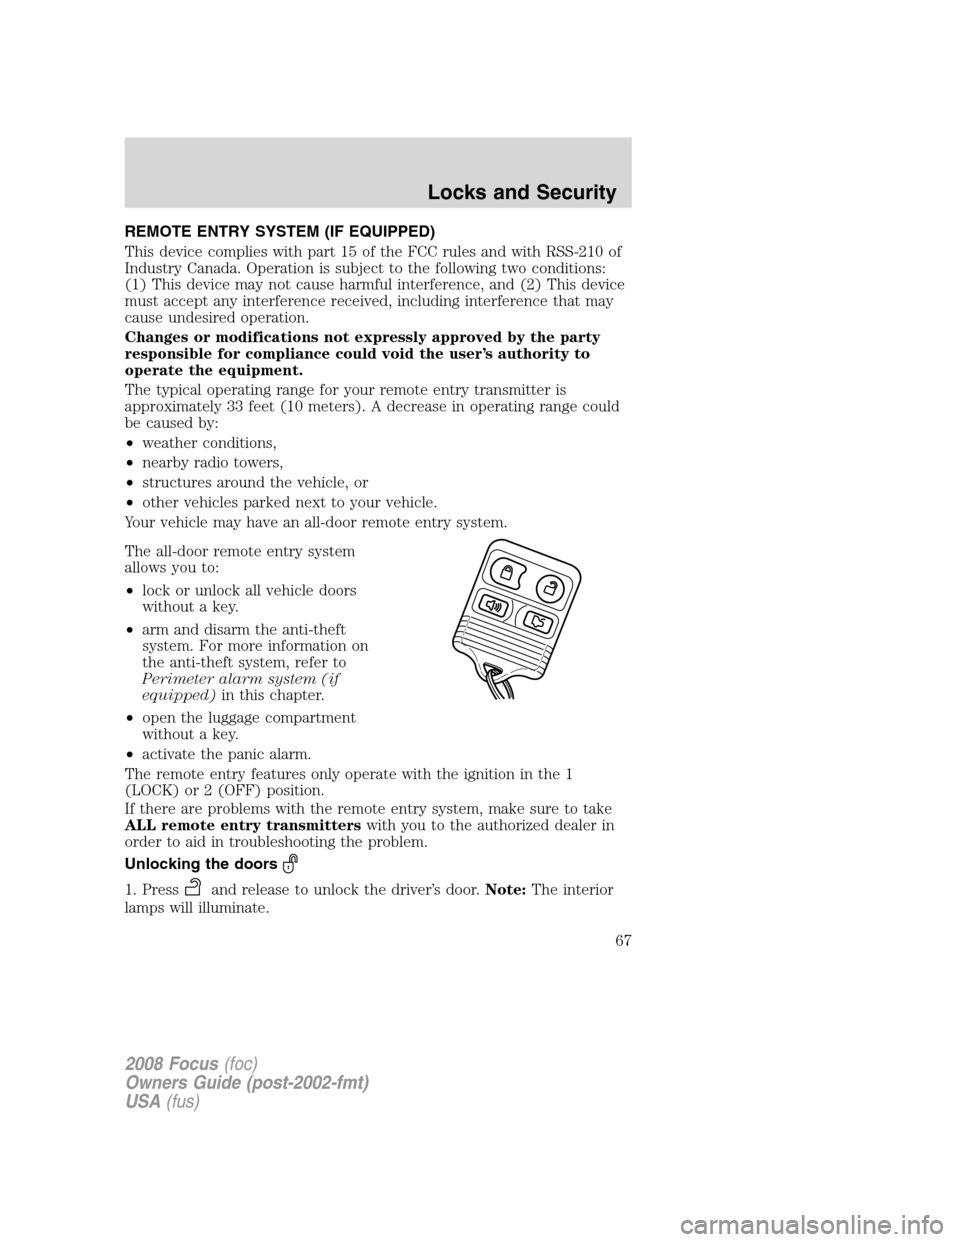 FORD FOCUS 2008 2.G Repair Manual REMOTE ENTRY SYSTEM (IF EQUIPPED)
This device complies with part 15 of the FCC rules and with RSS-210 of
Industry Canada. Operation is subject to the following two conditions:
(1) This device may not 